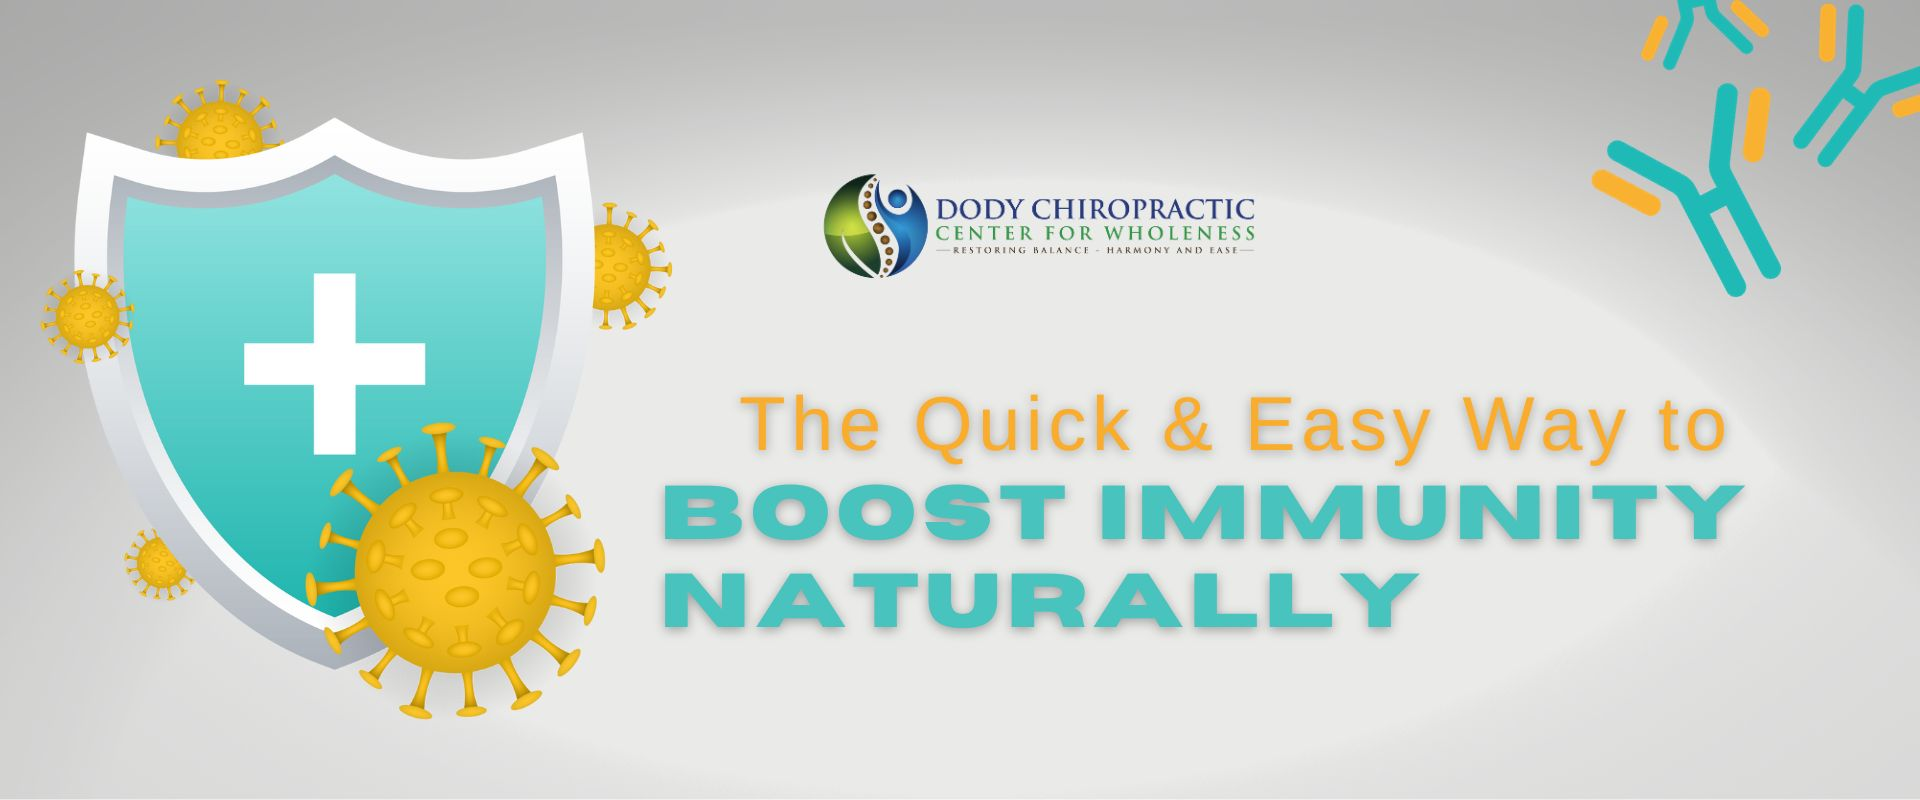 The Quick & Easy Way to Boost Immunity Naturally banner